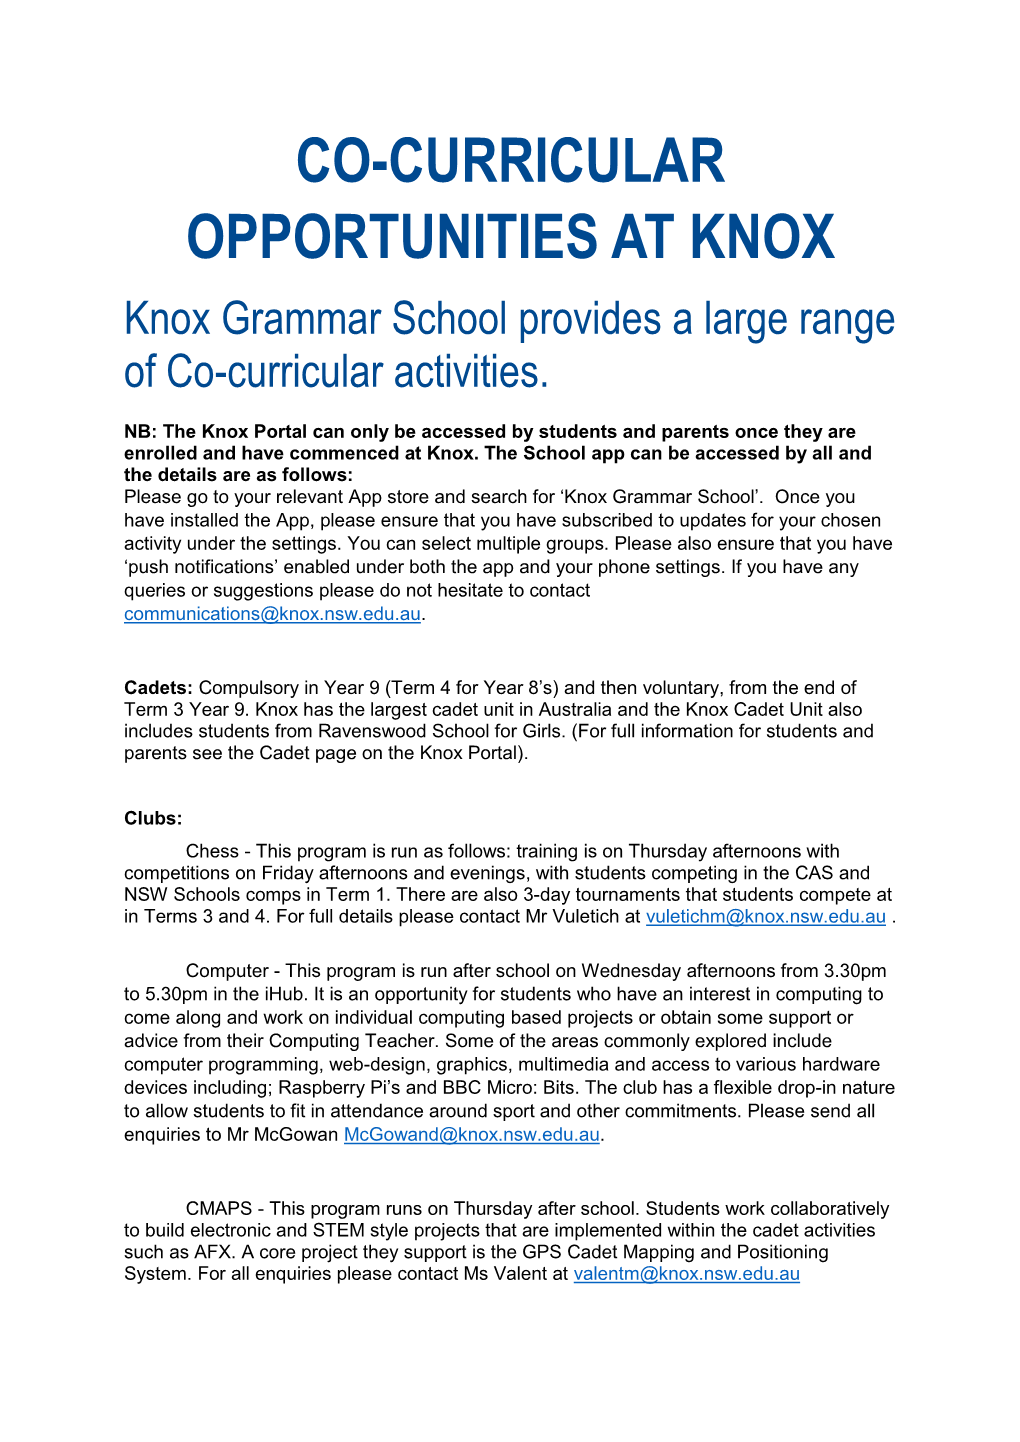 CO-CURRICULAR OPPORTUNITIES at KNOX Knox Grammar School Provides a Large Range of Co-Curricular Activities